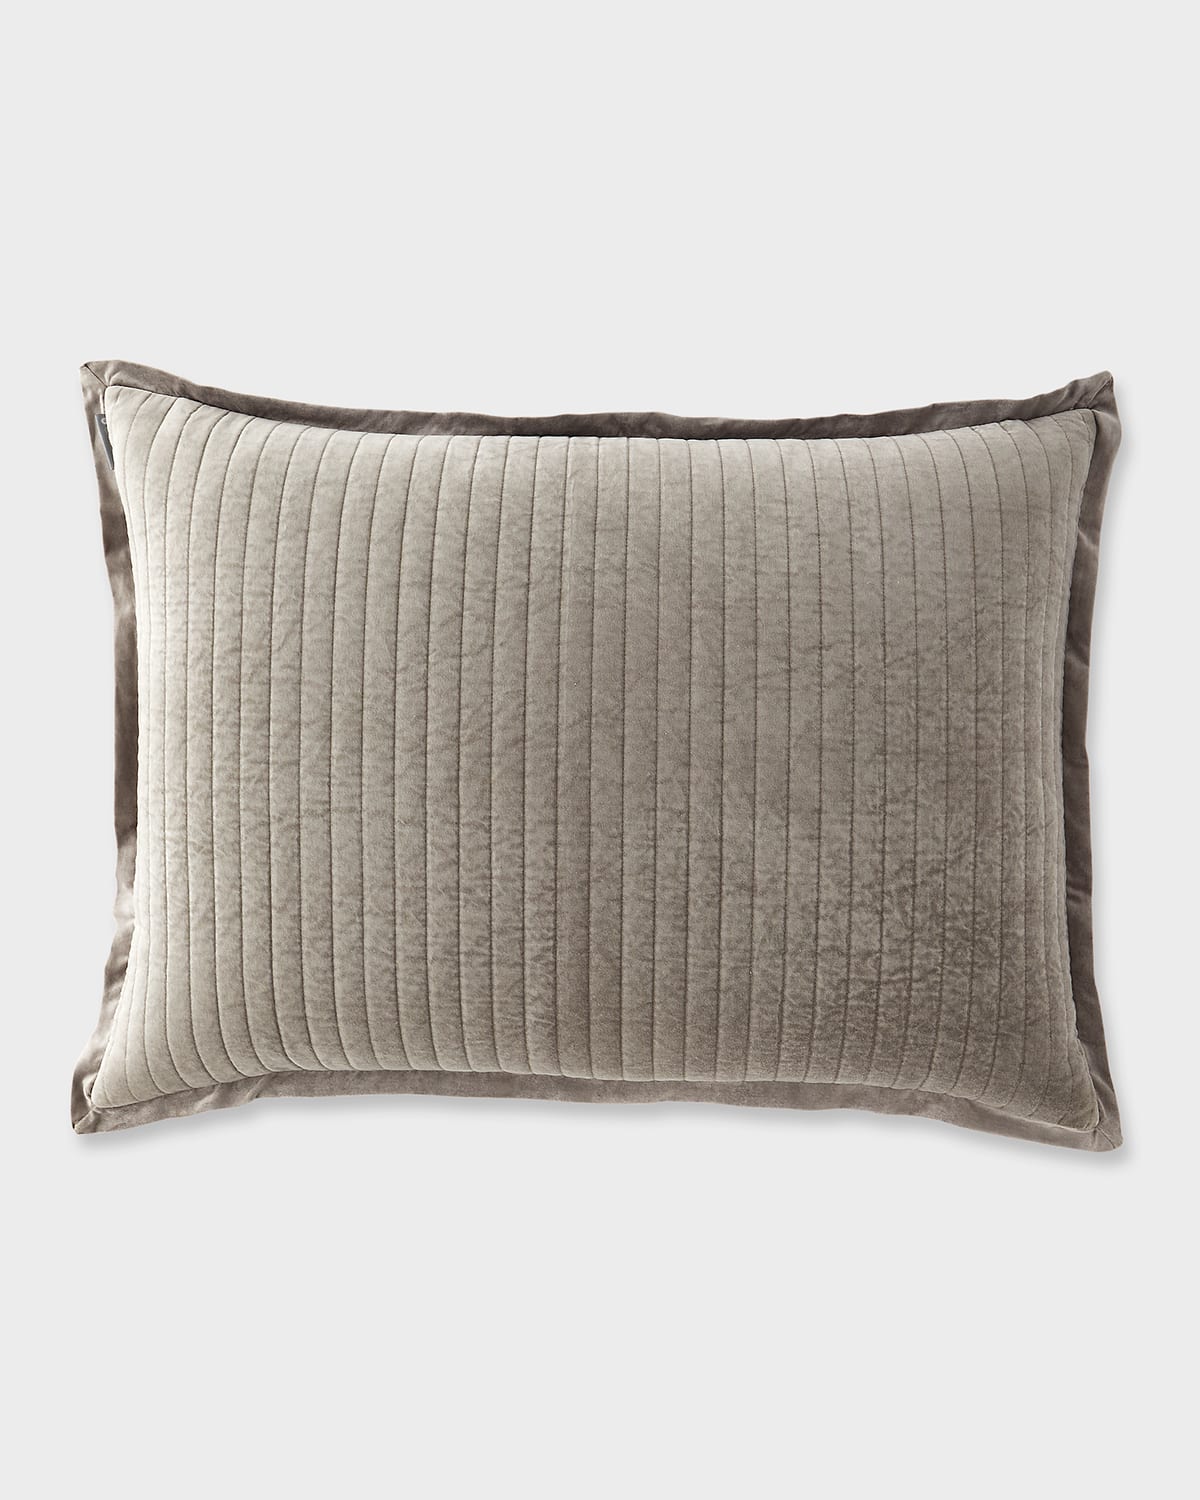 Lili Alessandra Aria Quilted Luxe European Pillow In Light Gray